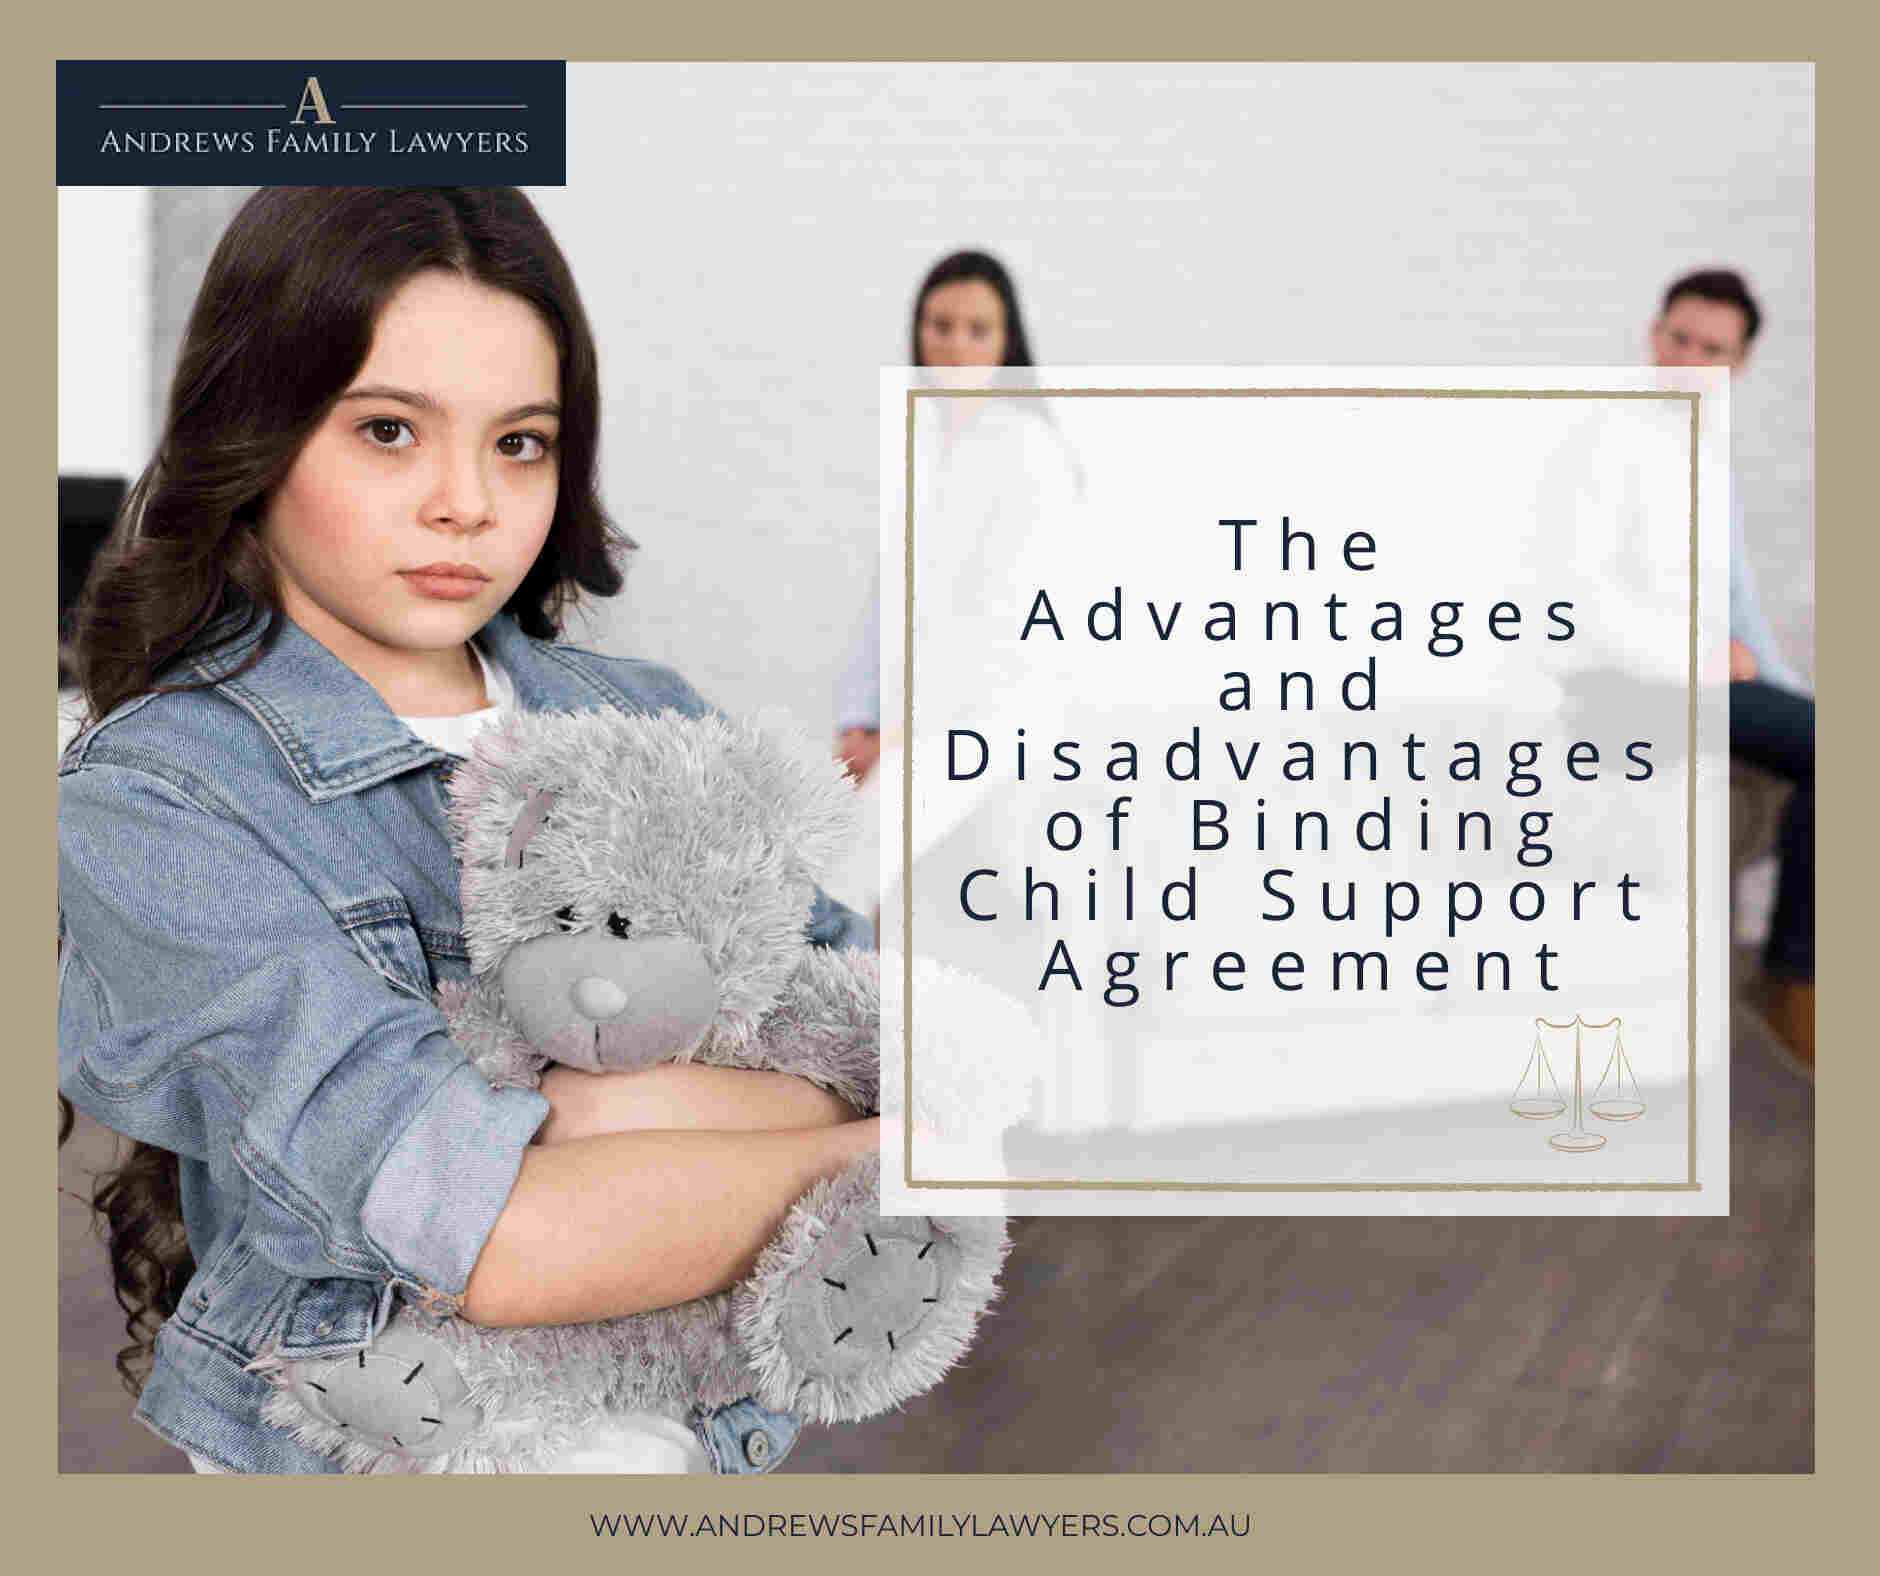 The Advantages and Disadvantages of Binding Child Support Agreement